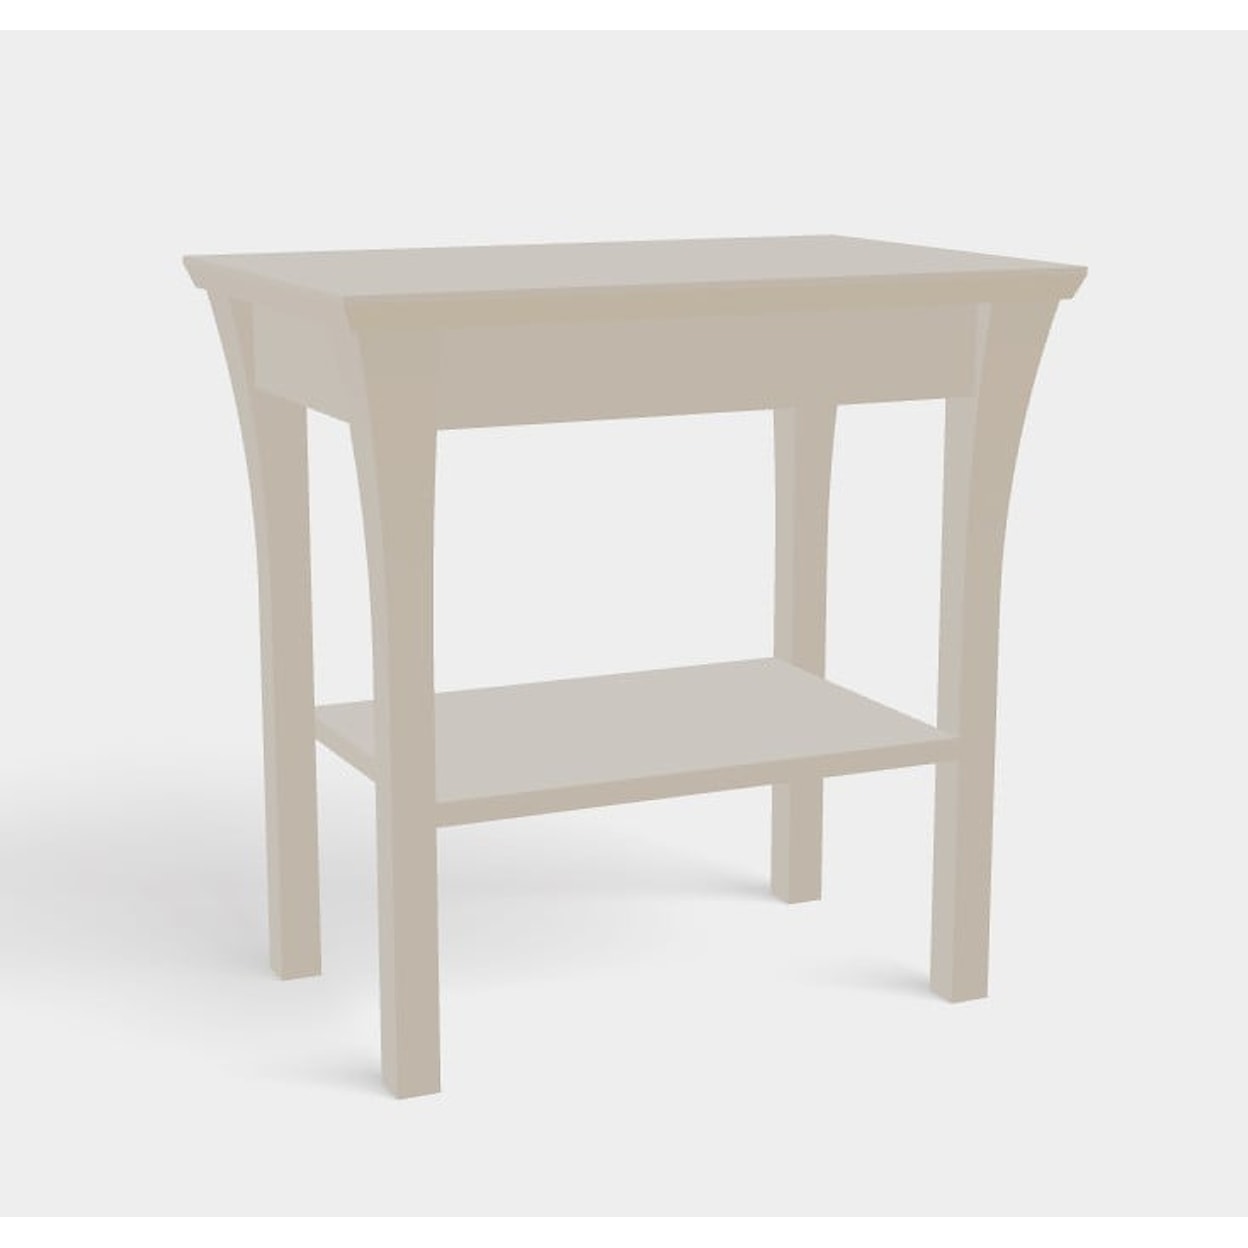 Mavin Marco Occasional Customizable Marco Chairside Table